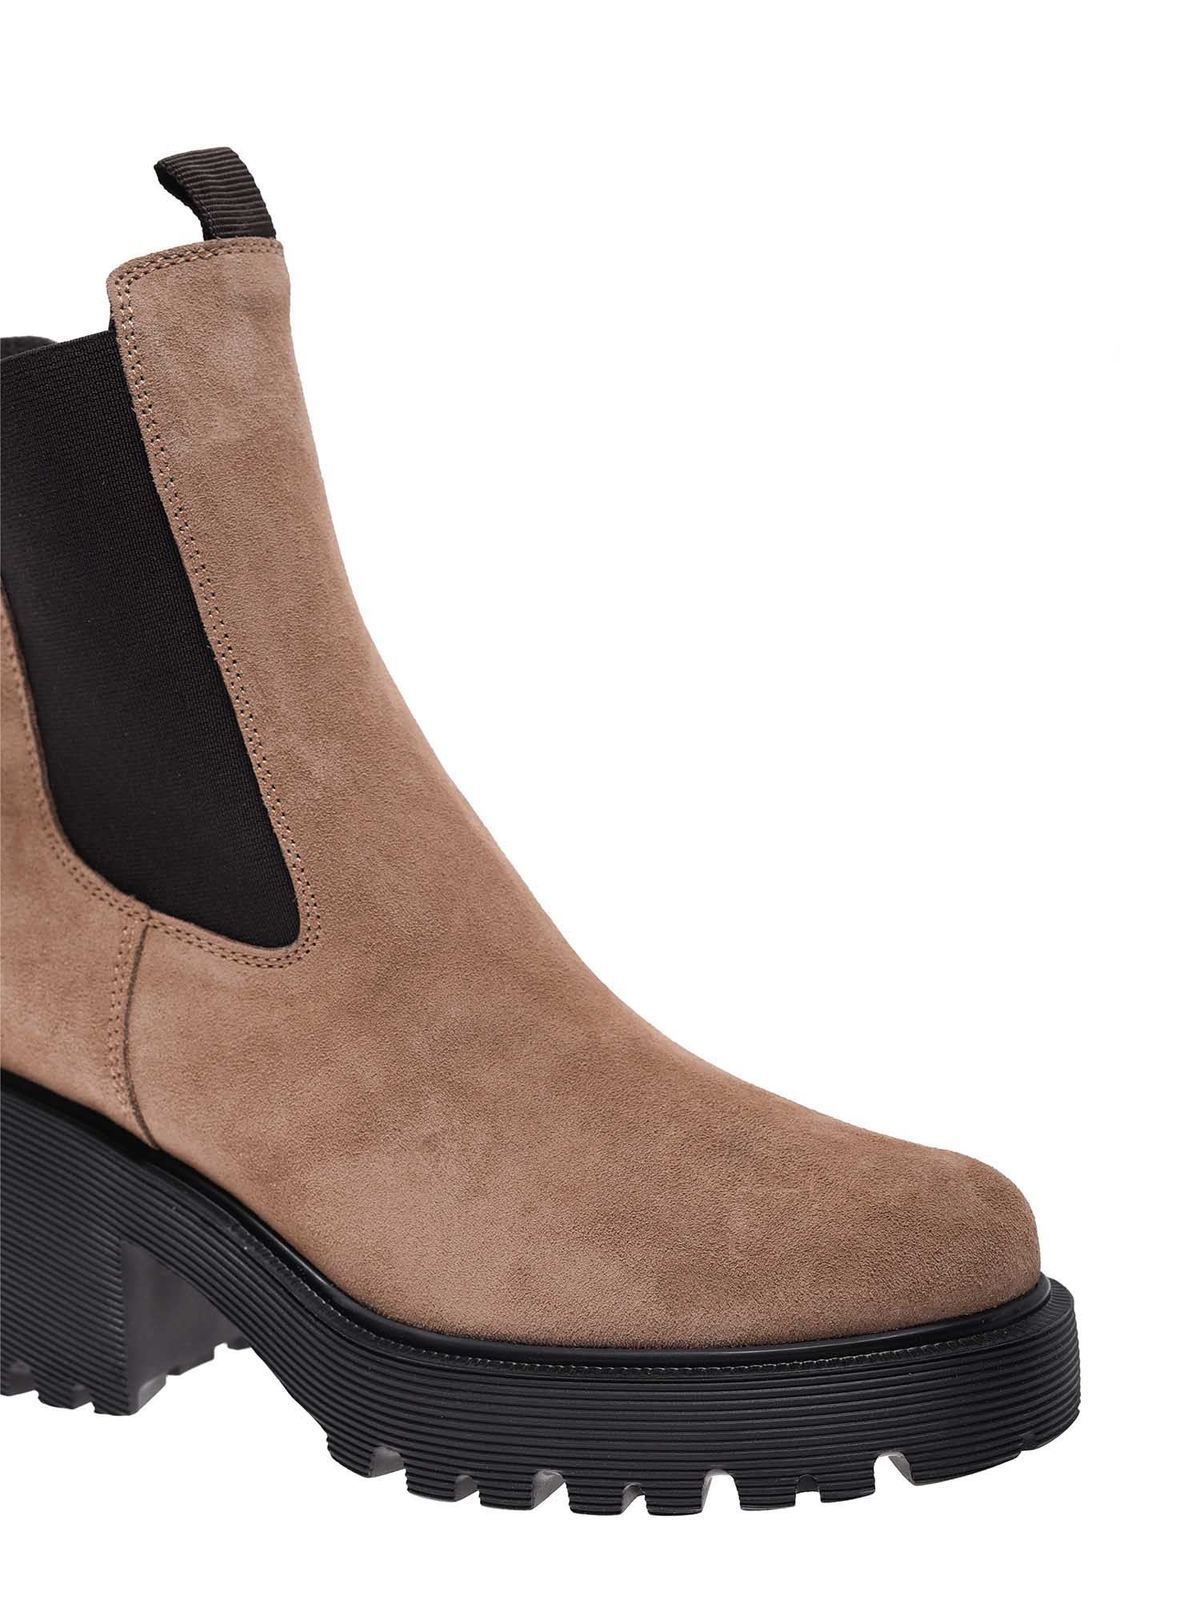 Renovering dvs. lineal Ankle boots Hogan - Chelsea boots in beige - HXW5840DV80BYEC814